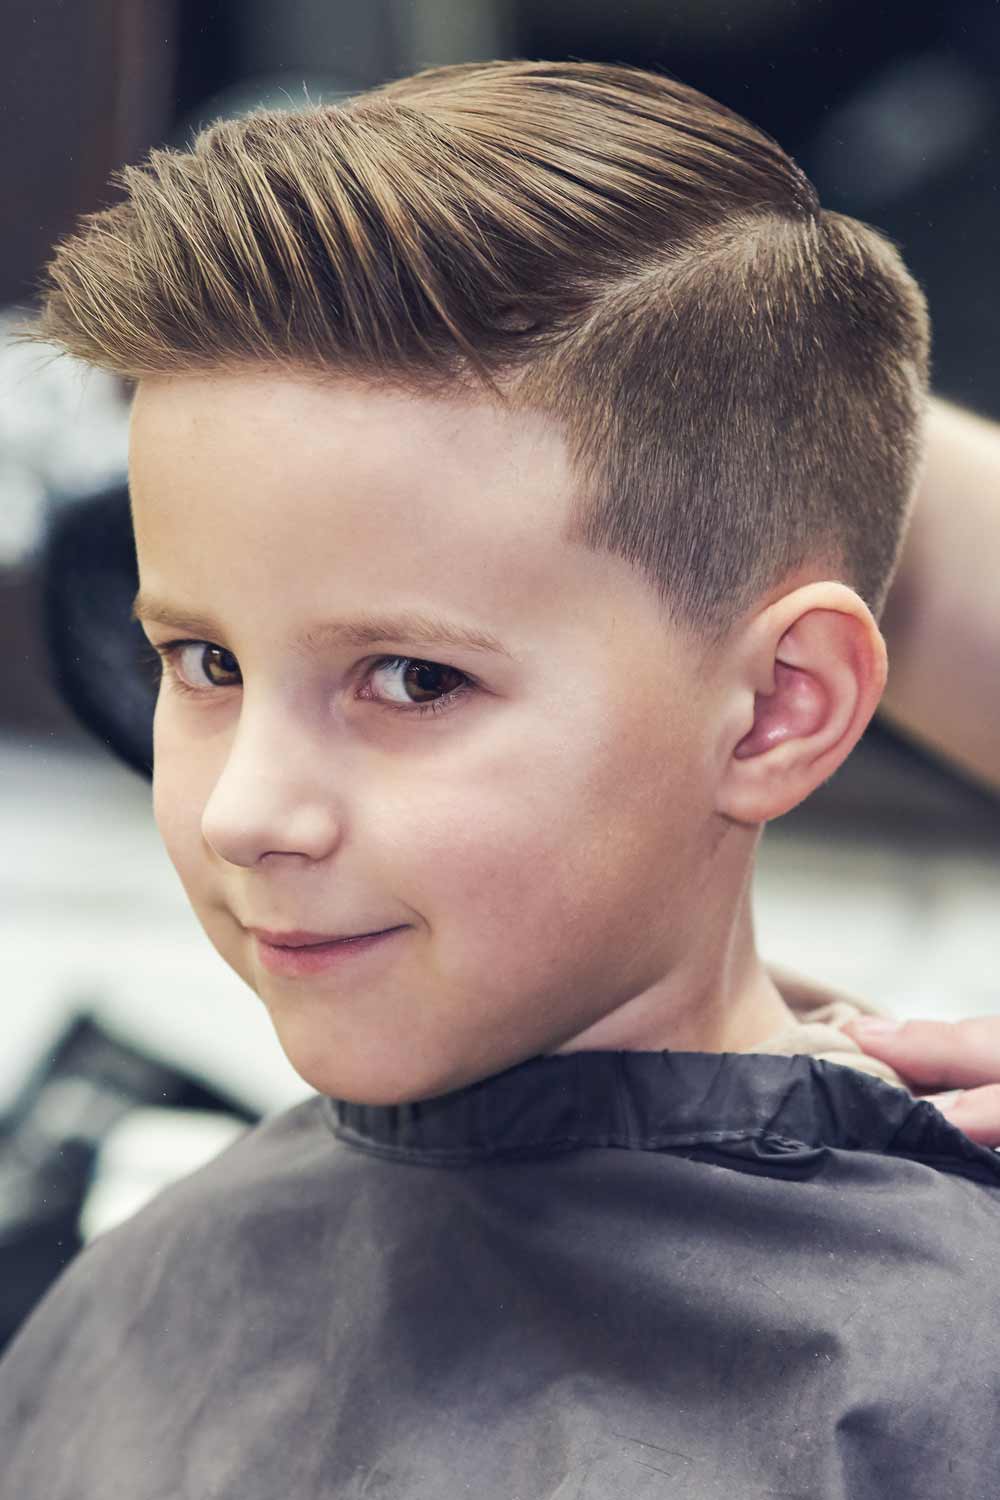 73 Boys Haircuts To Start The School Year Right